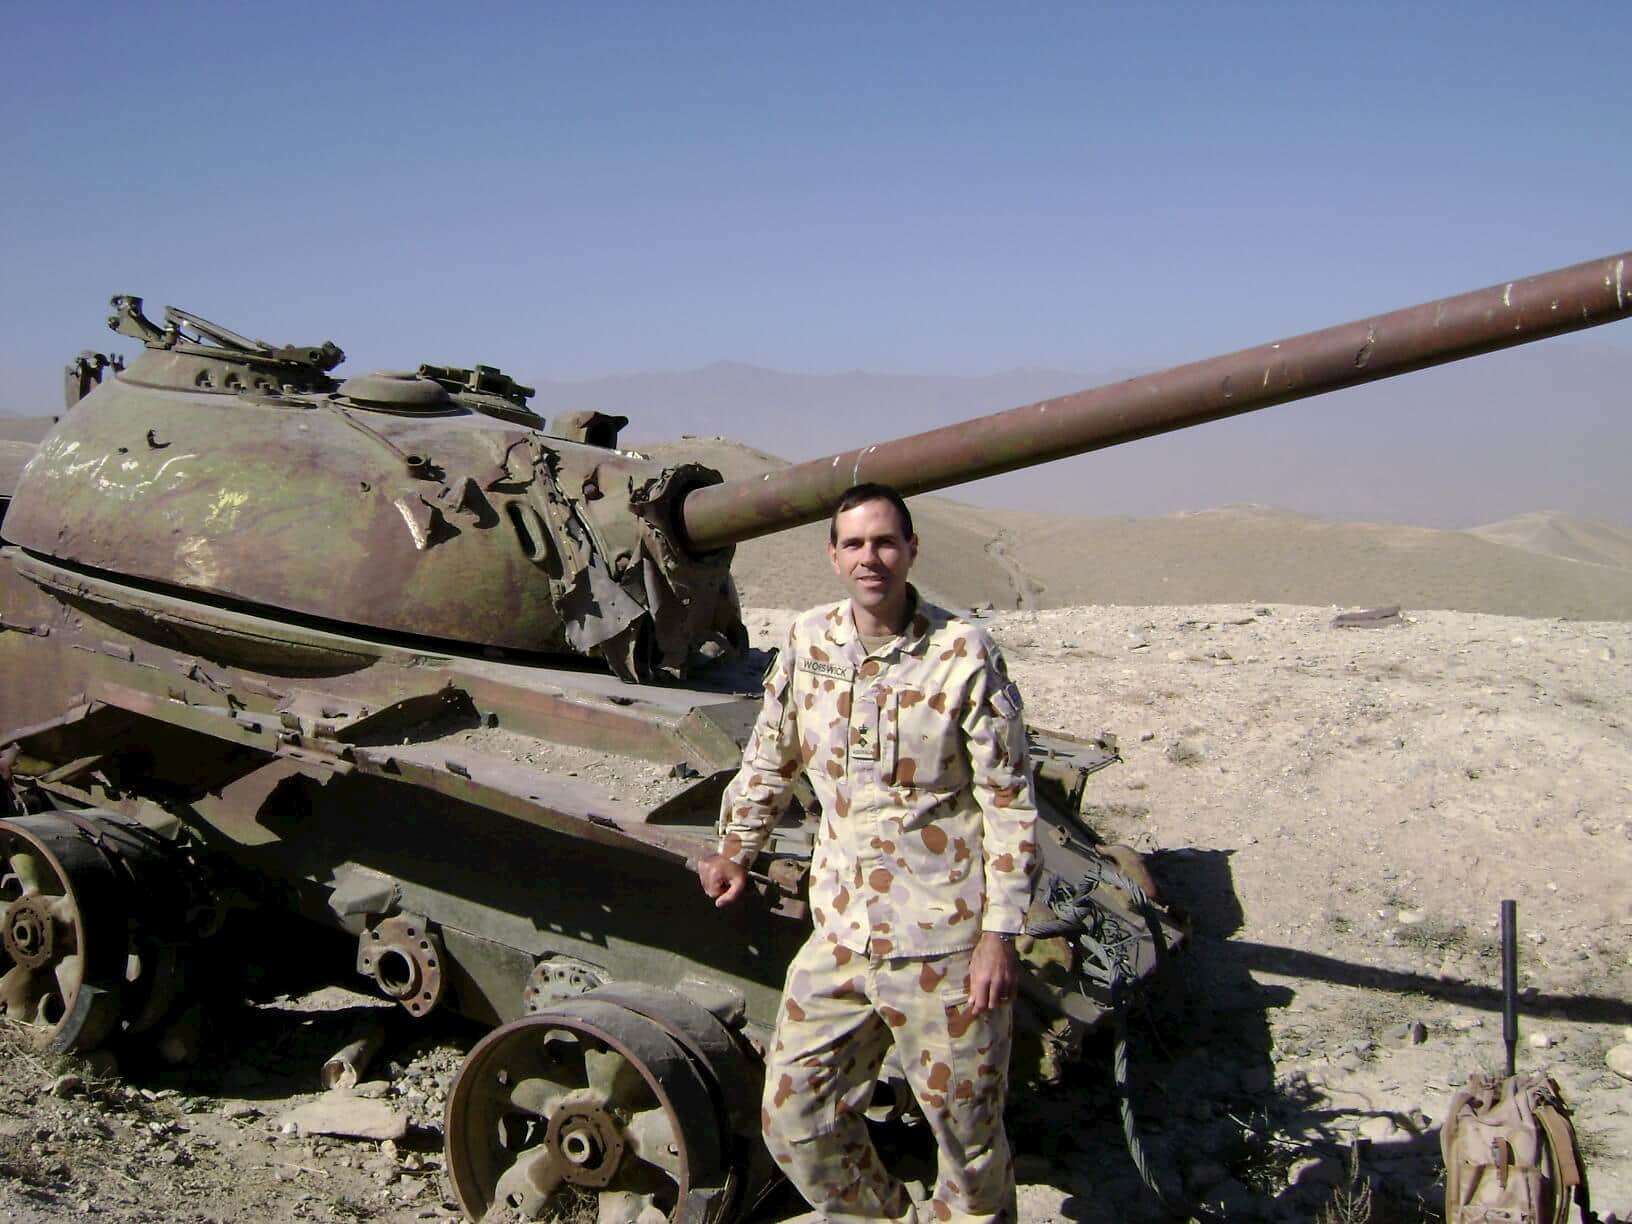 Dr Robert (Bob) Worswick standing next to destroyed Russian tank in Afghanistan